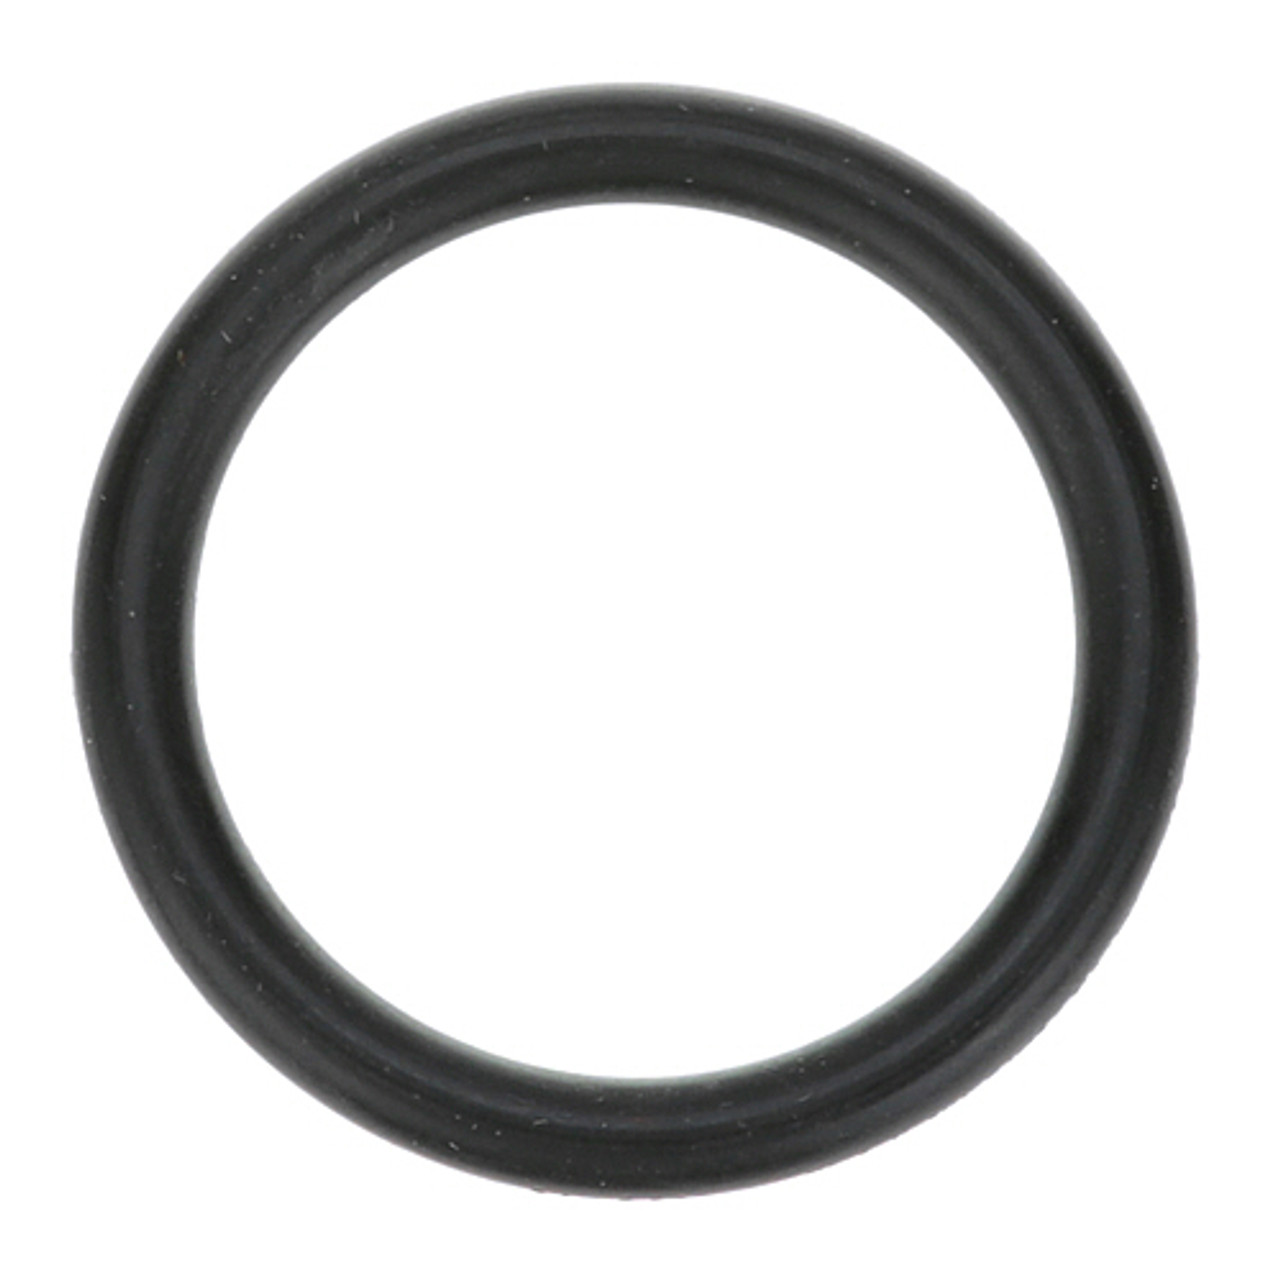 O-Ring 1" Id X 1/8" Width - Replacement Part For Electro Freeze HC160500